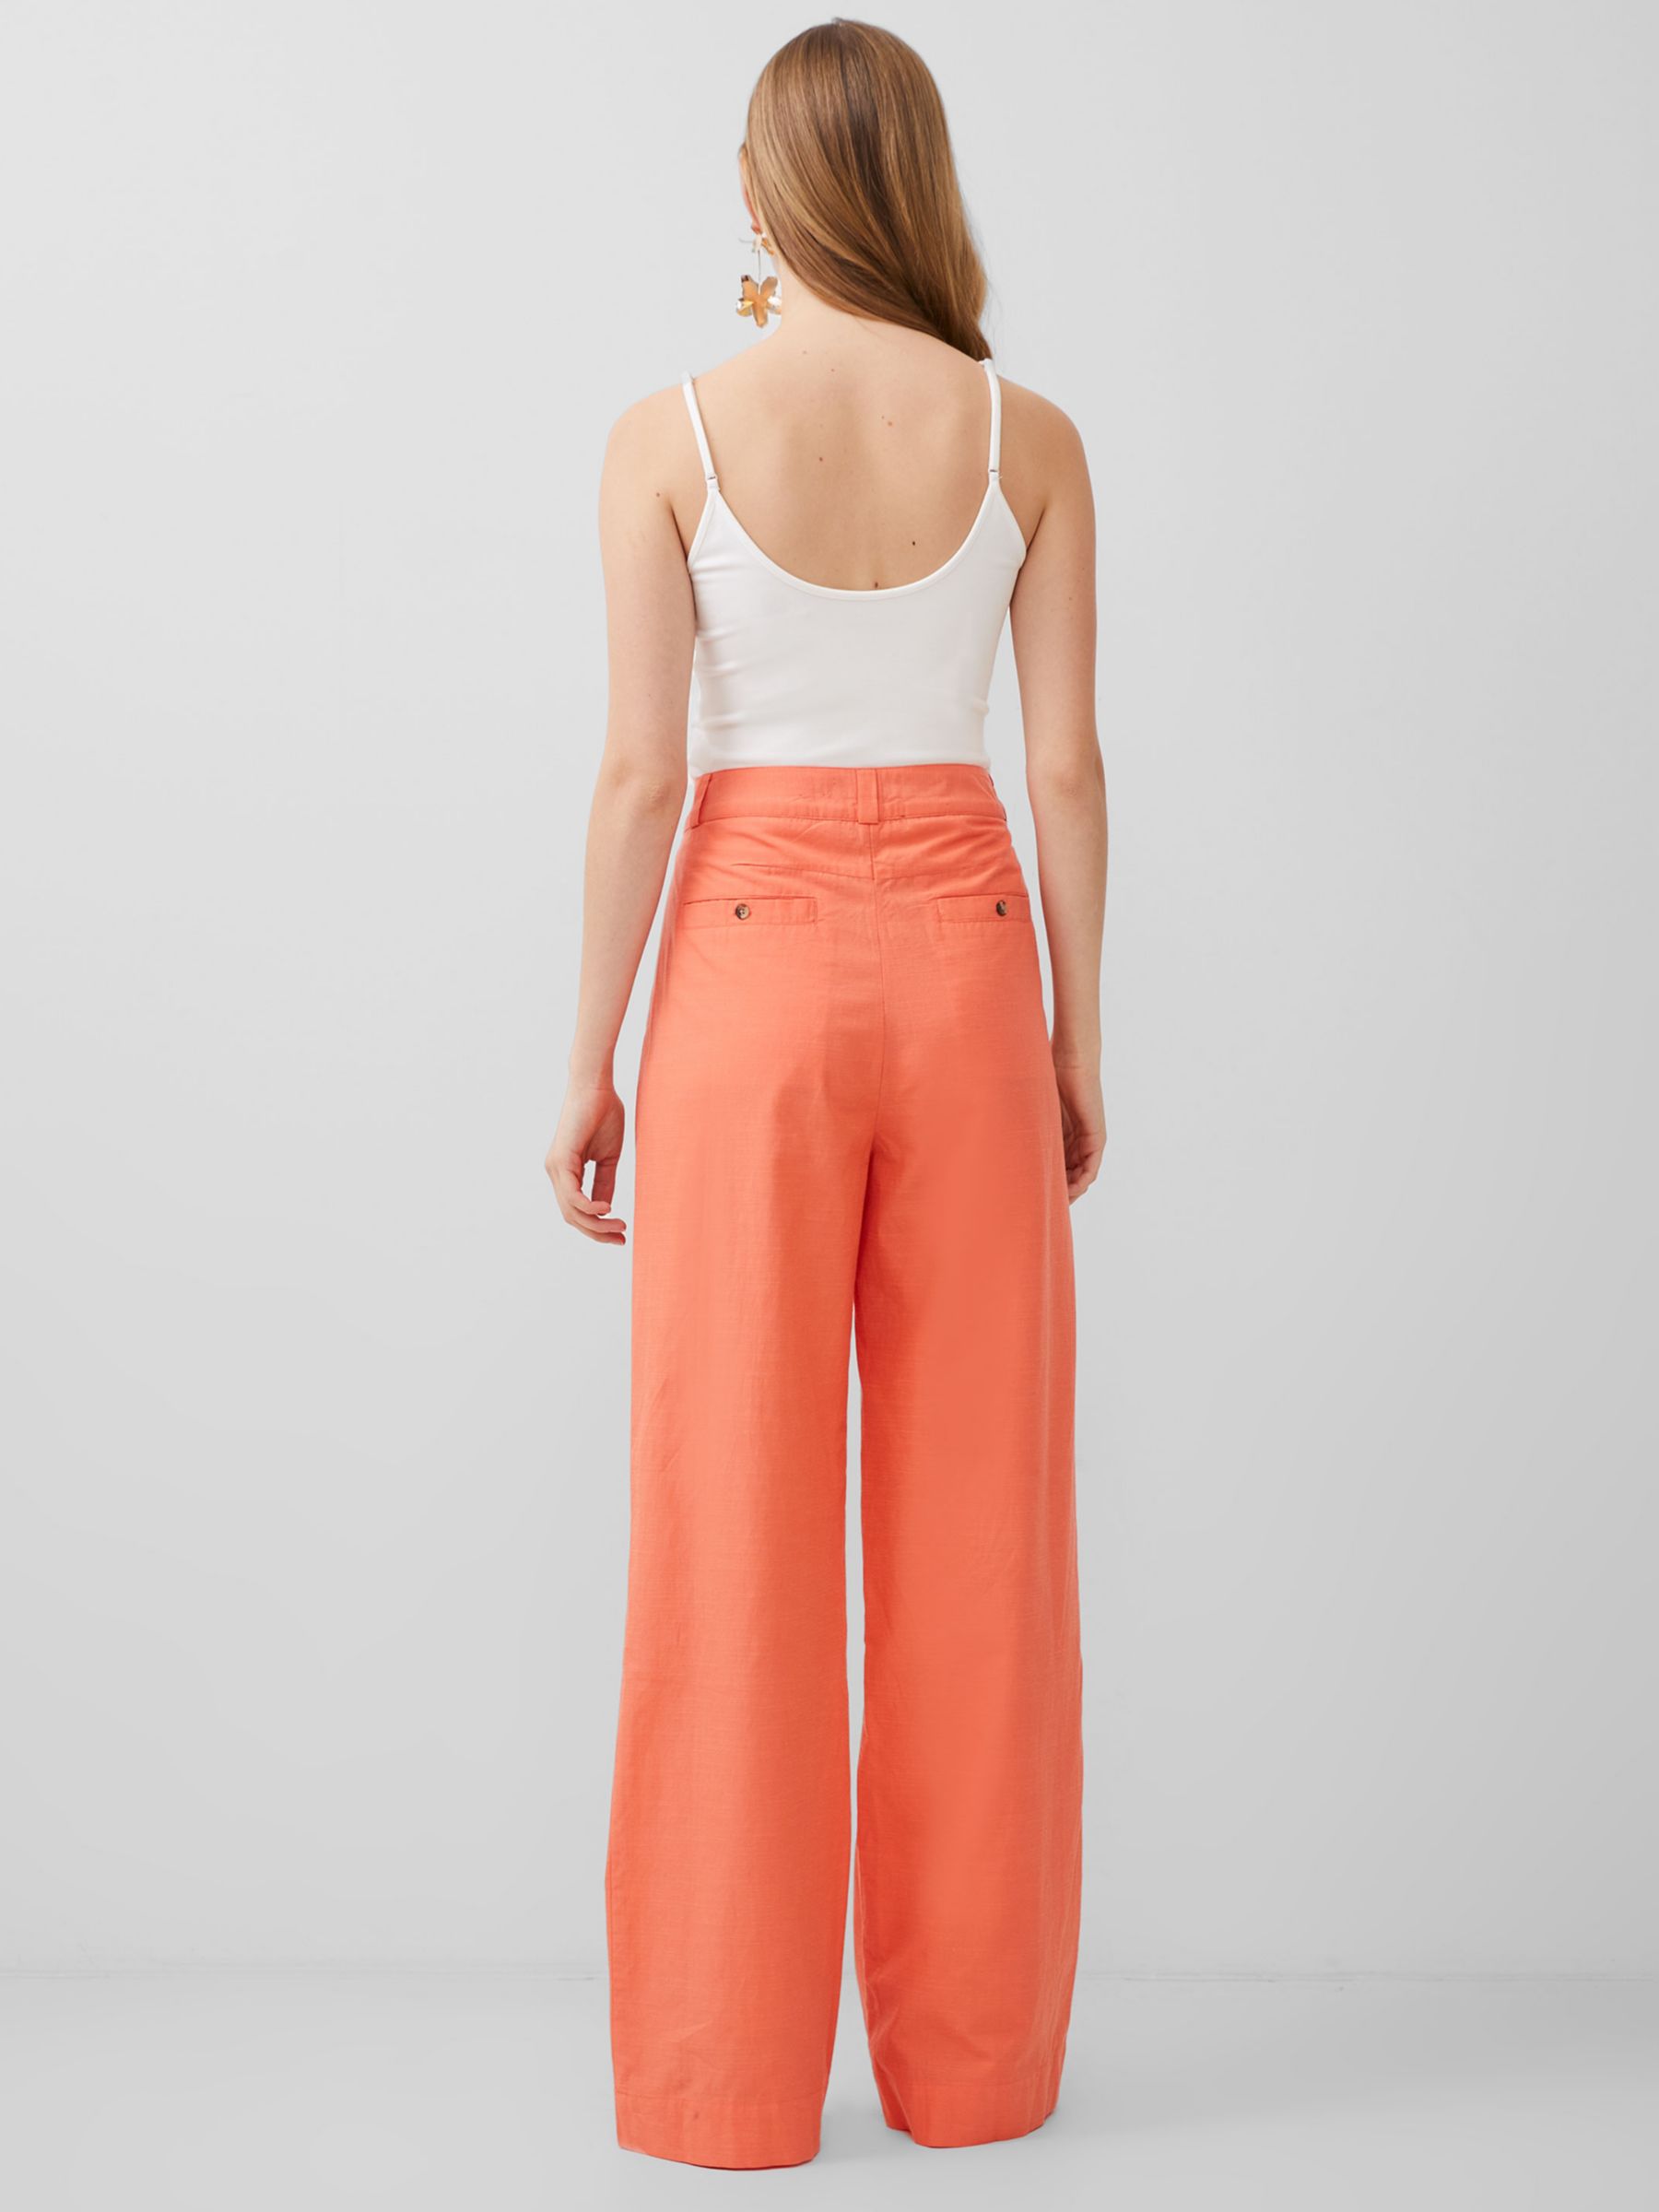 French Connection Alania City Trousers, Coral, 6